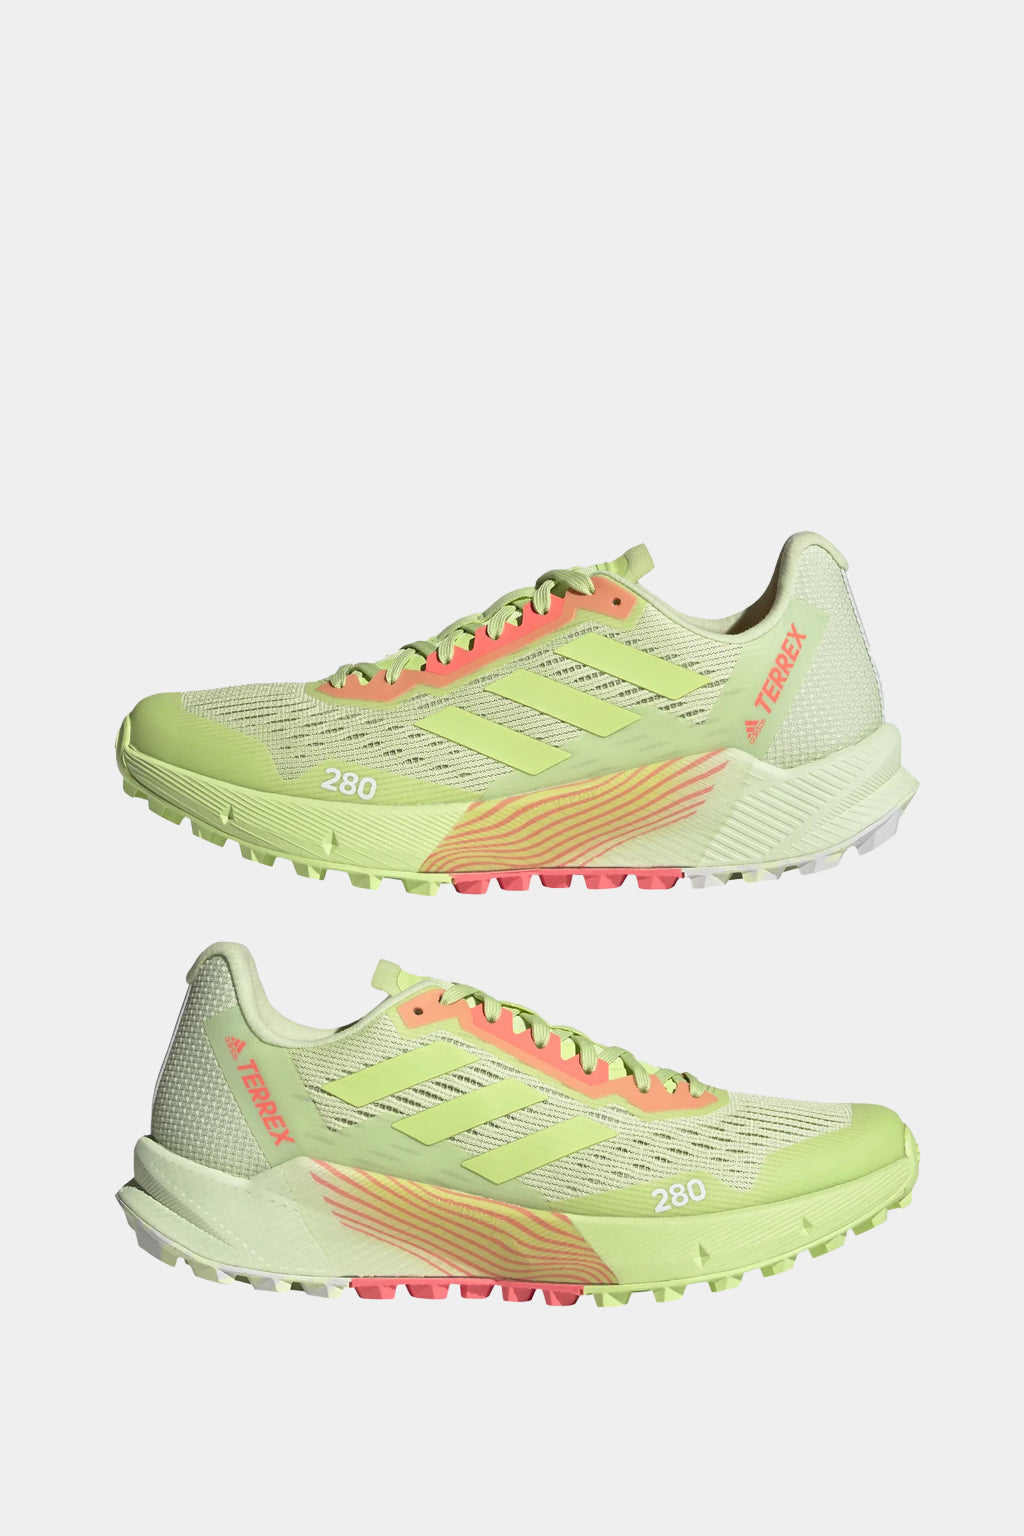 Adidas - Terrex Agravic Flow 2 Trail Running Shoes